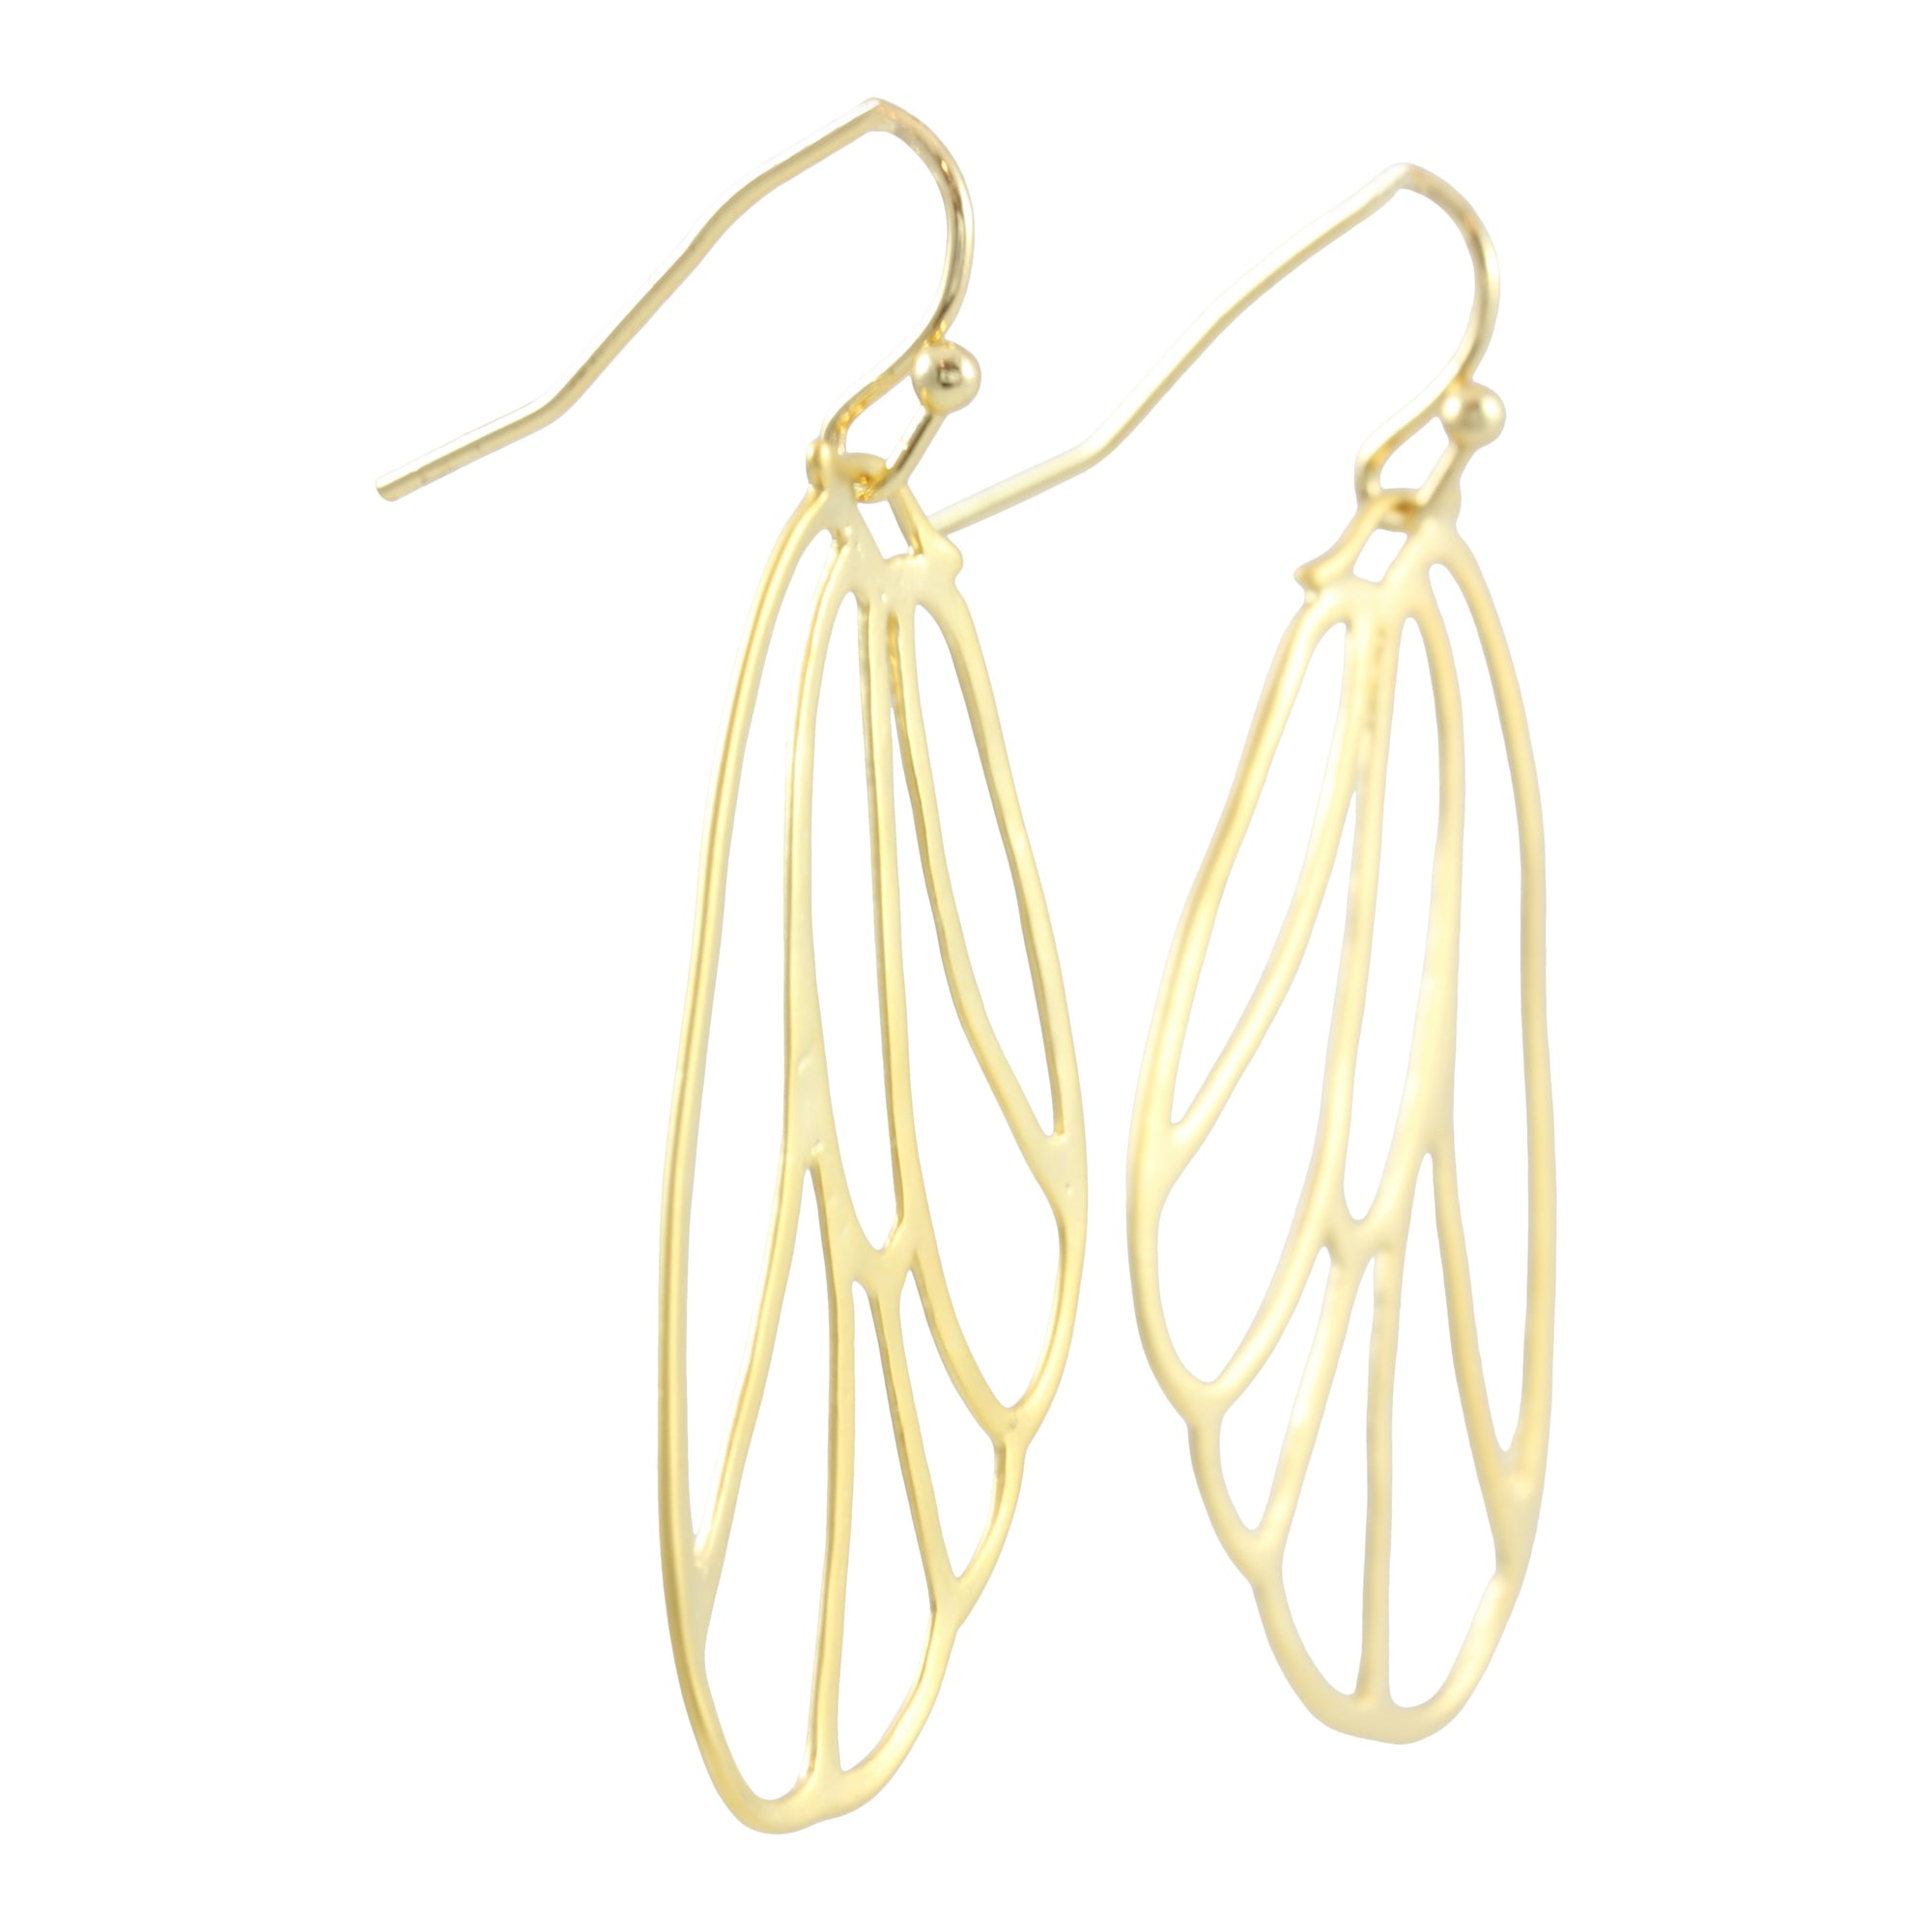 "L'Or" Matte Gold or Silver Filigree Cicada Wing Earrings